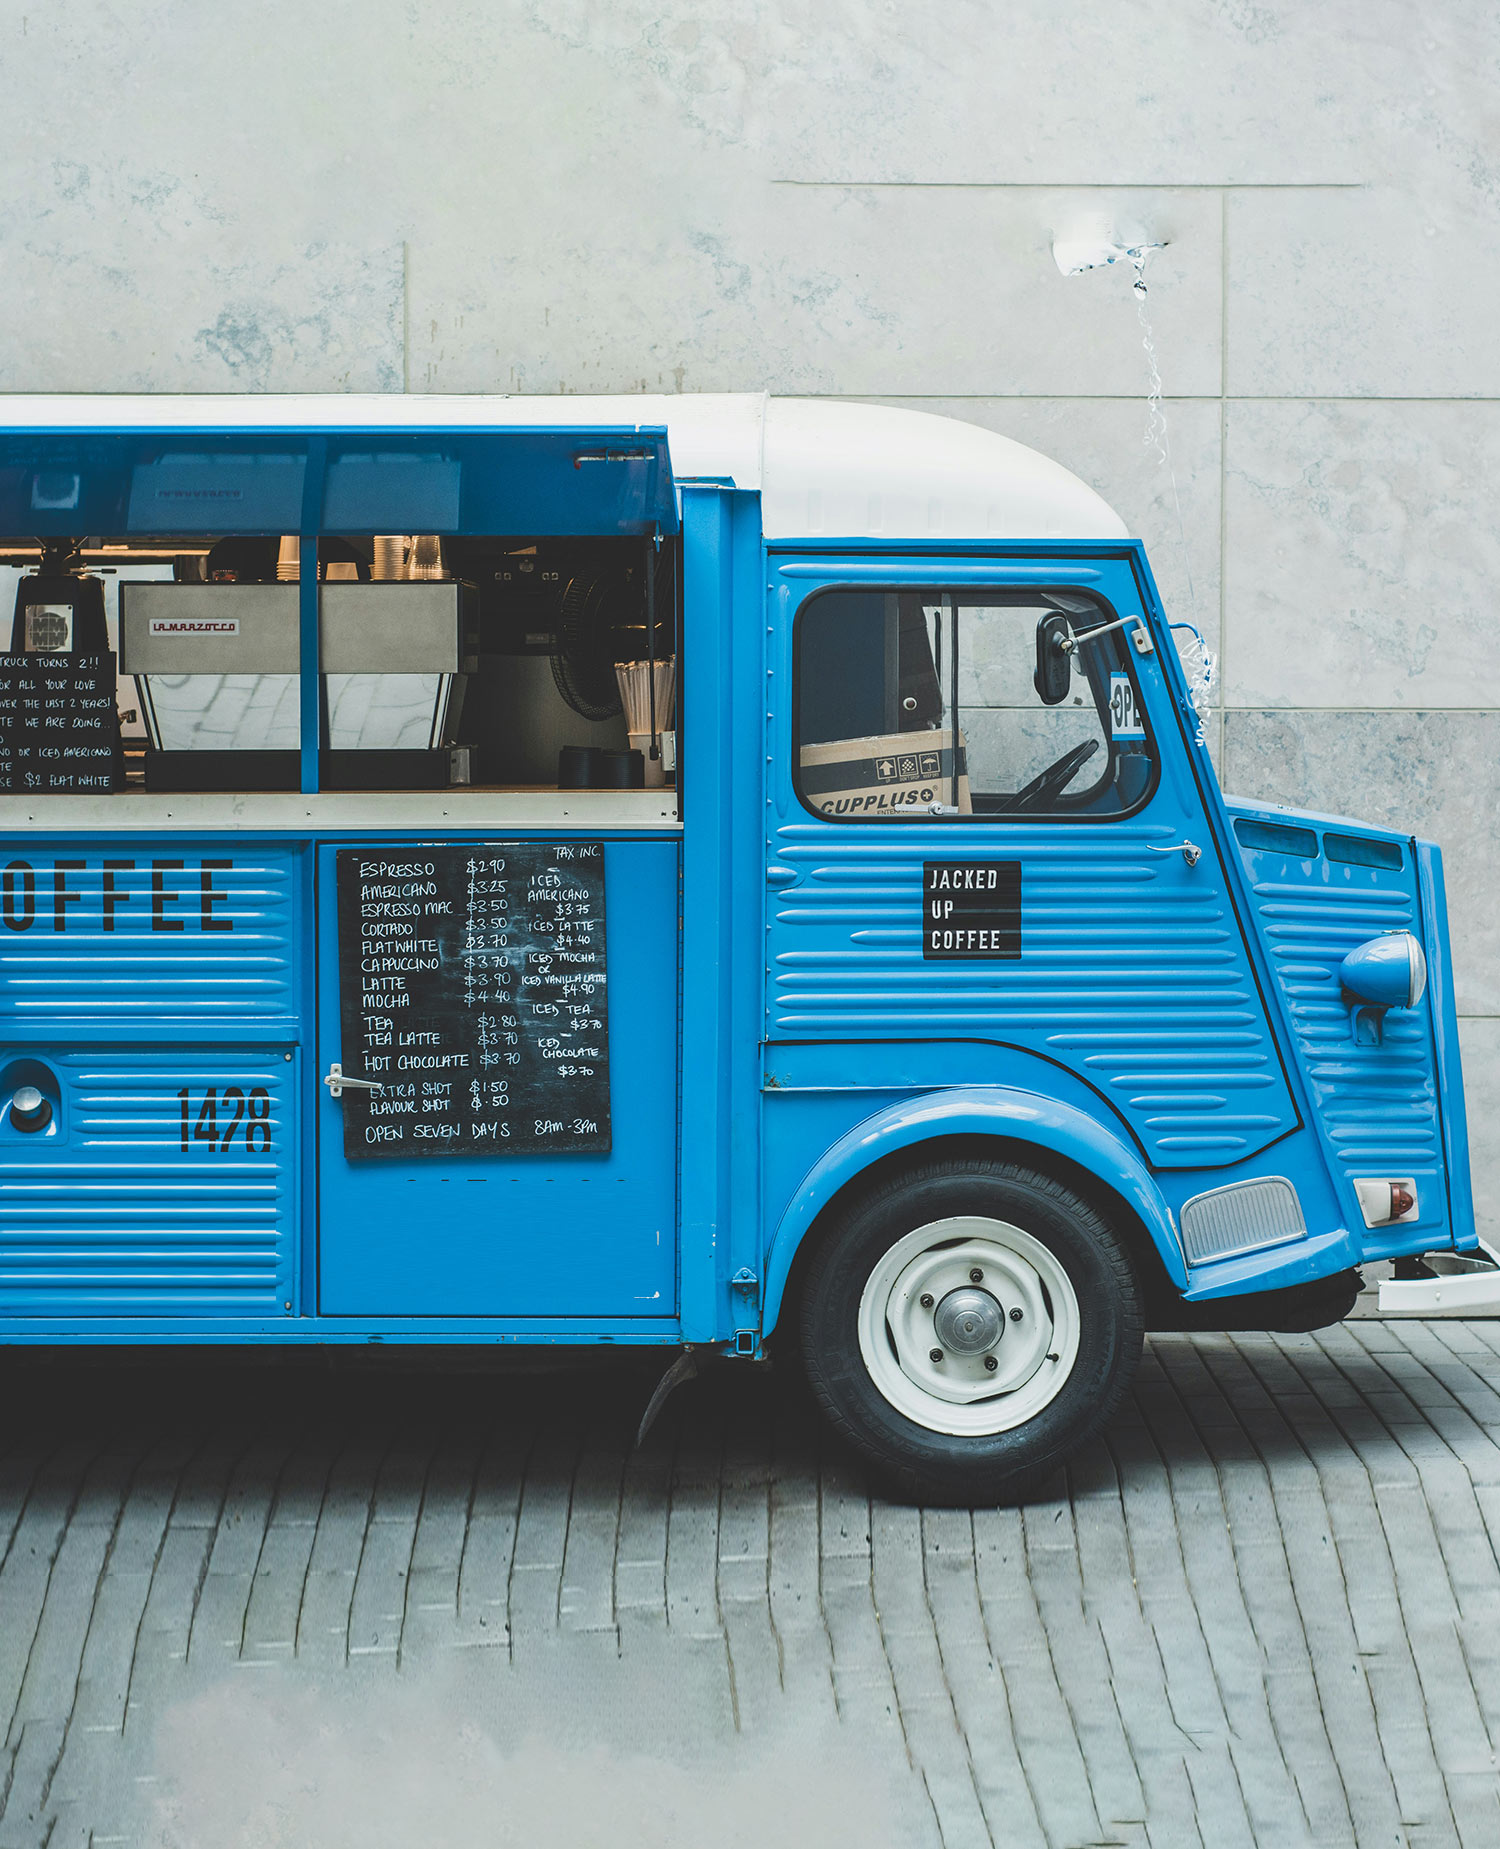 blue food truck selling coffee without any people nearby on a grey cobblestone path